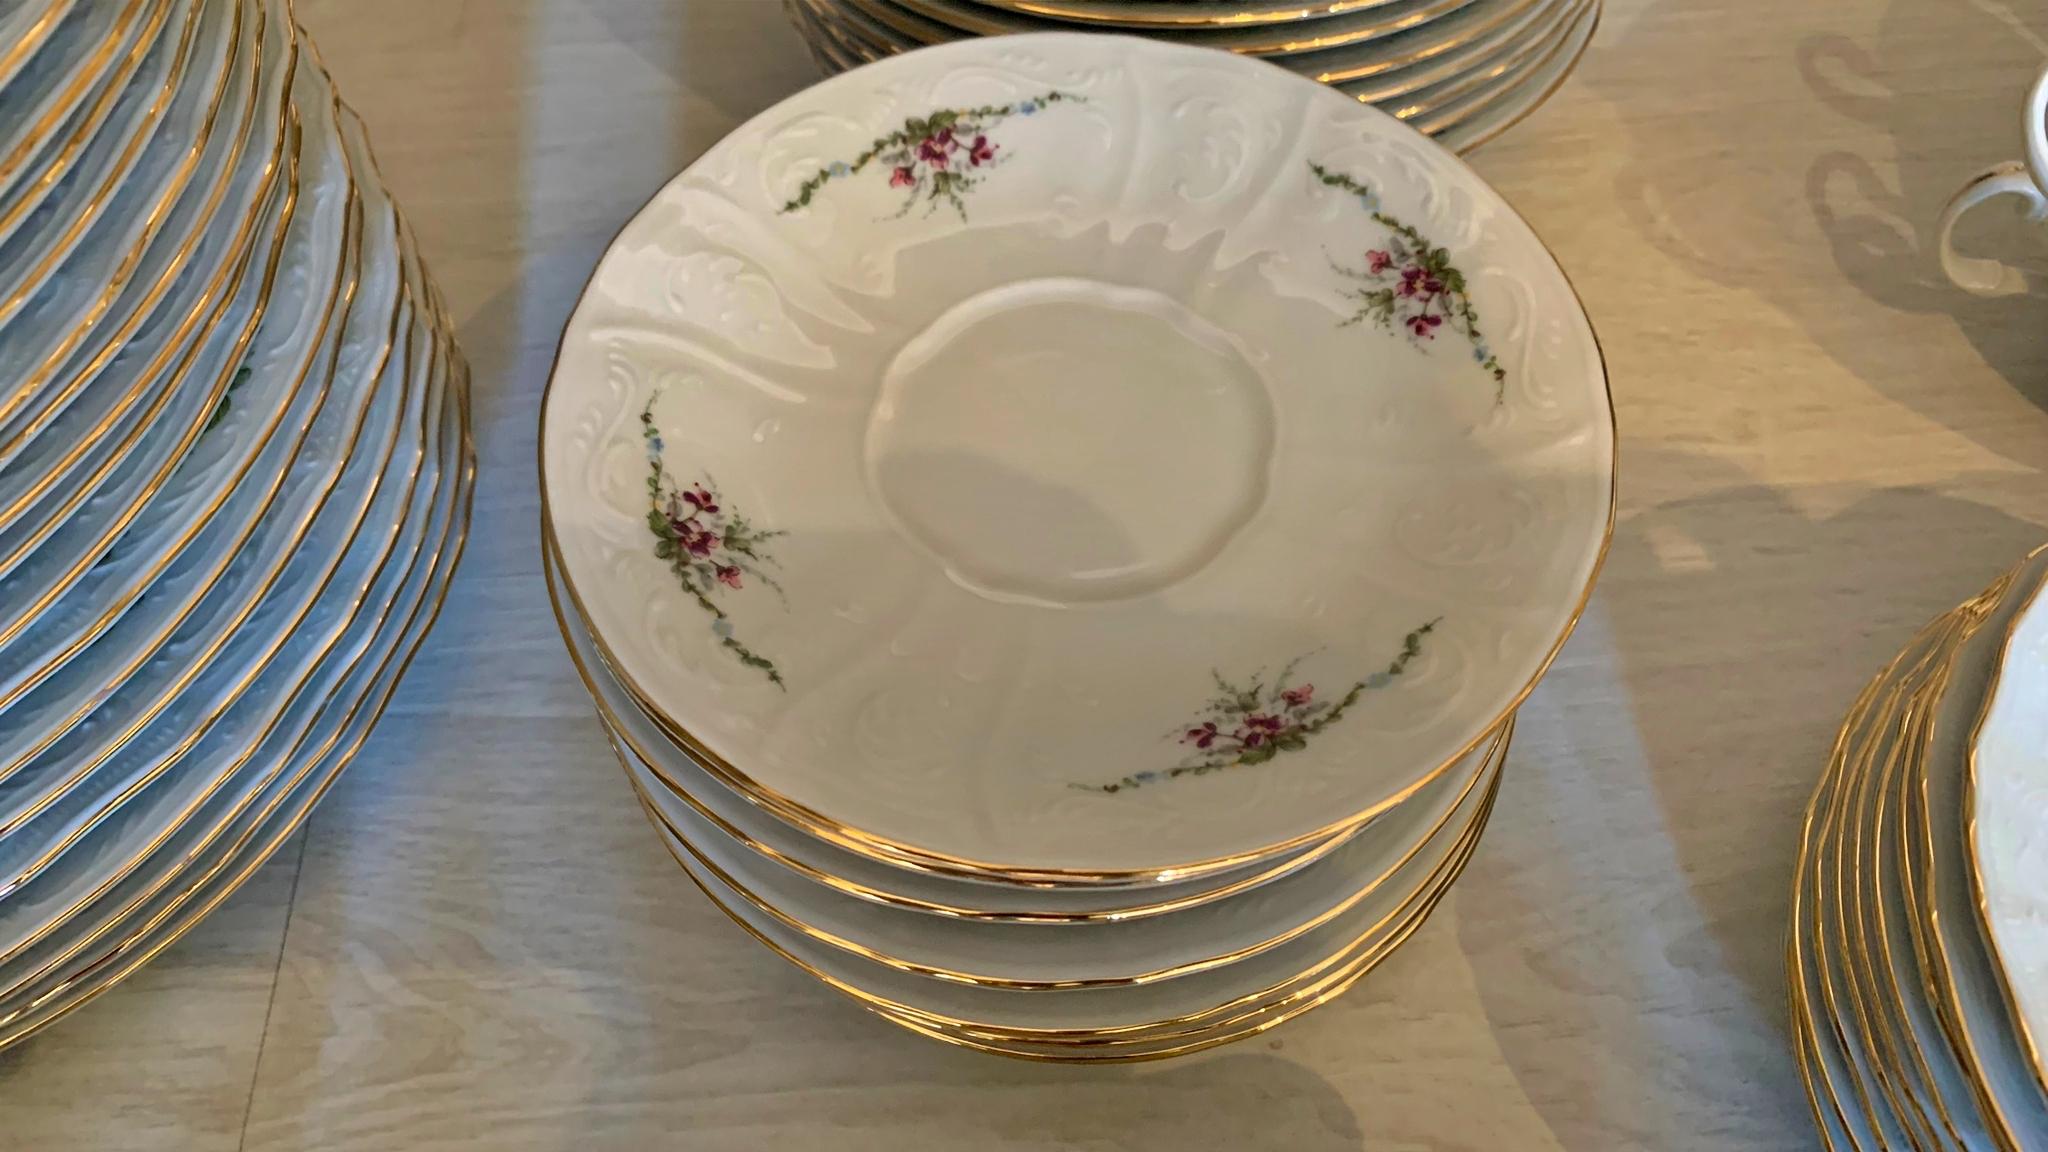 Tableware Set Bernadette - Czech Republic 104 pieces

24 flat plates
12 soup plates
 9 dessert plates
12 bouillon dishes
12 cups bouillon
 3 large trays
 2 small trays
 1 salsa
 1 tureen
 1 salad bowl

Complete set of coffee and